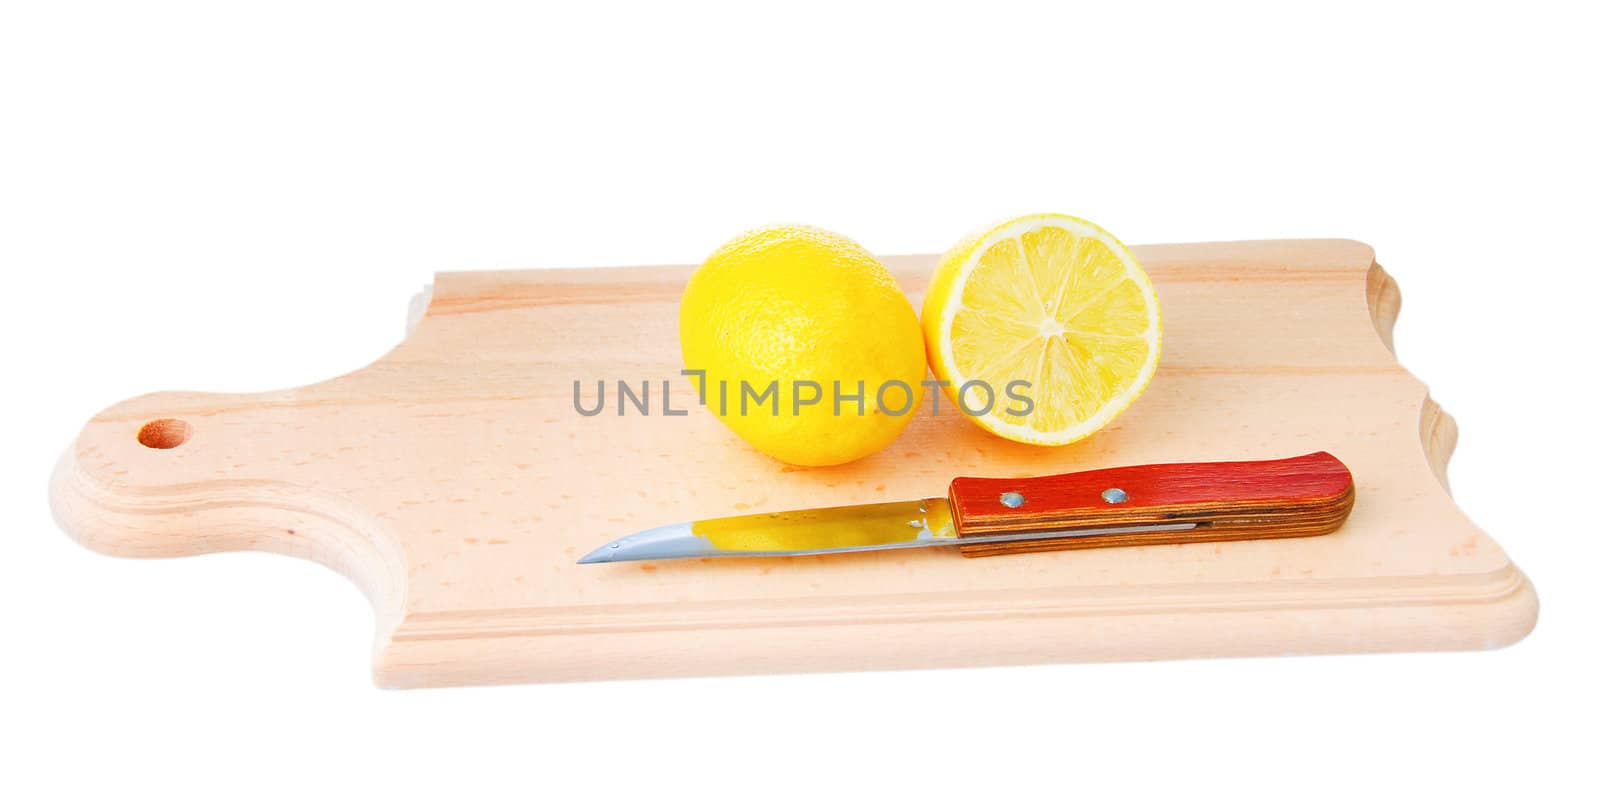 One whole lemon and one cutted lemon with knife on wooden plank. Isolated on white background.